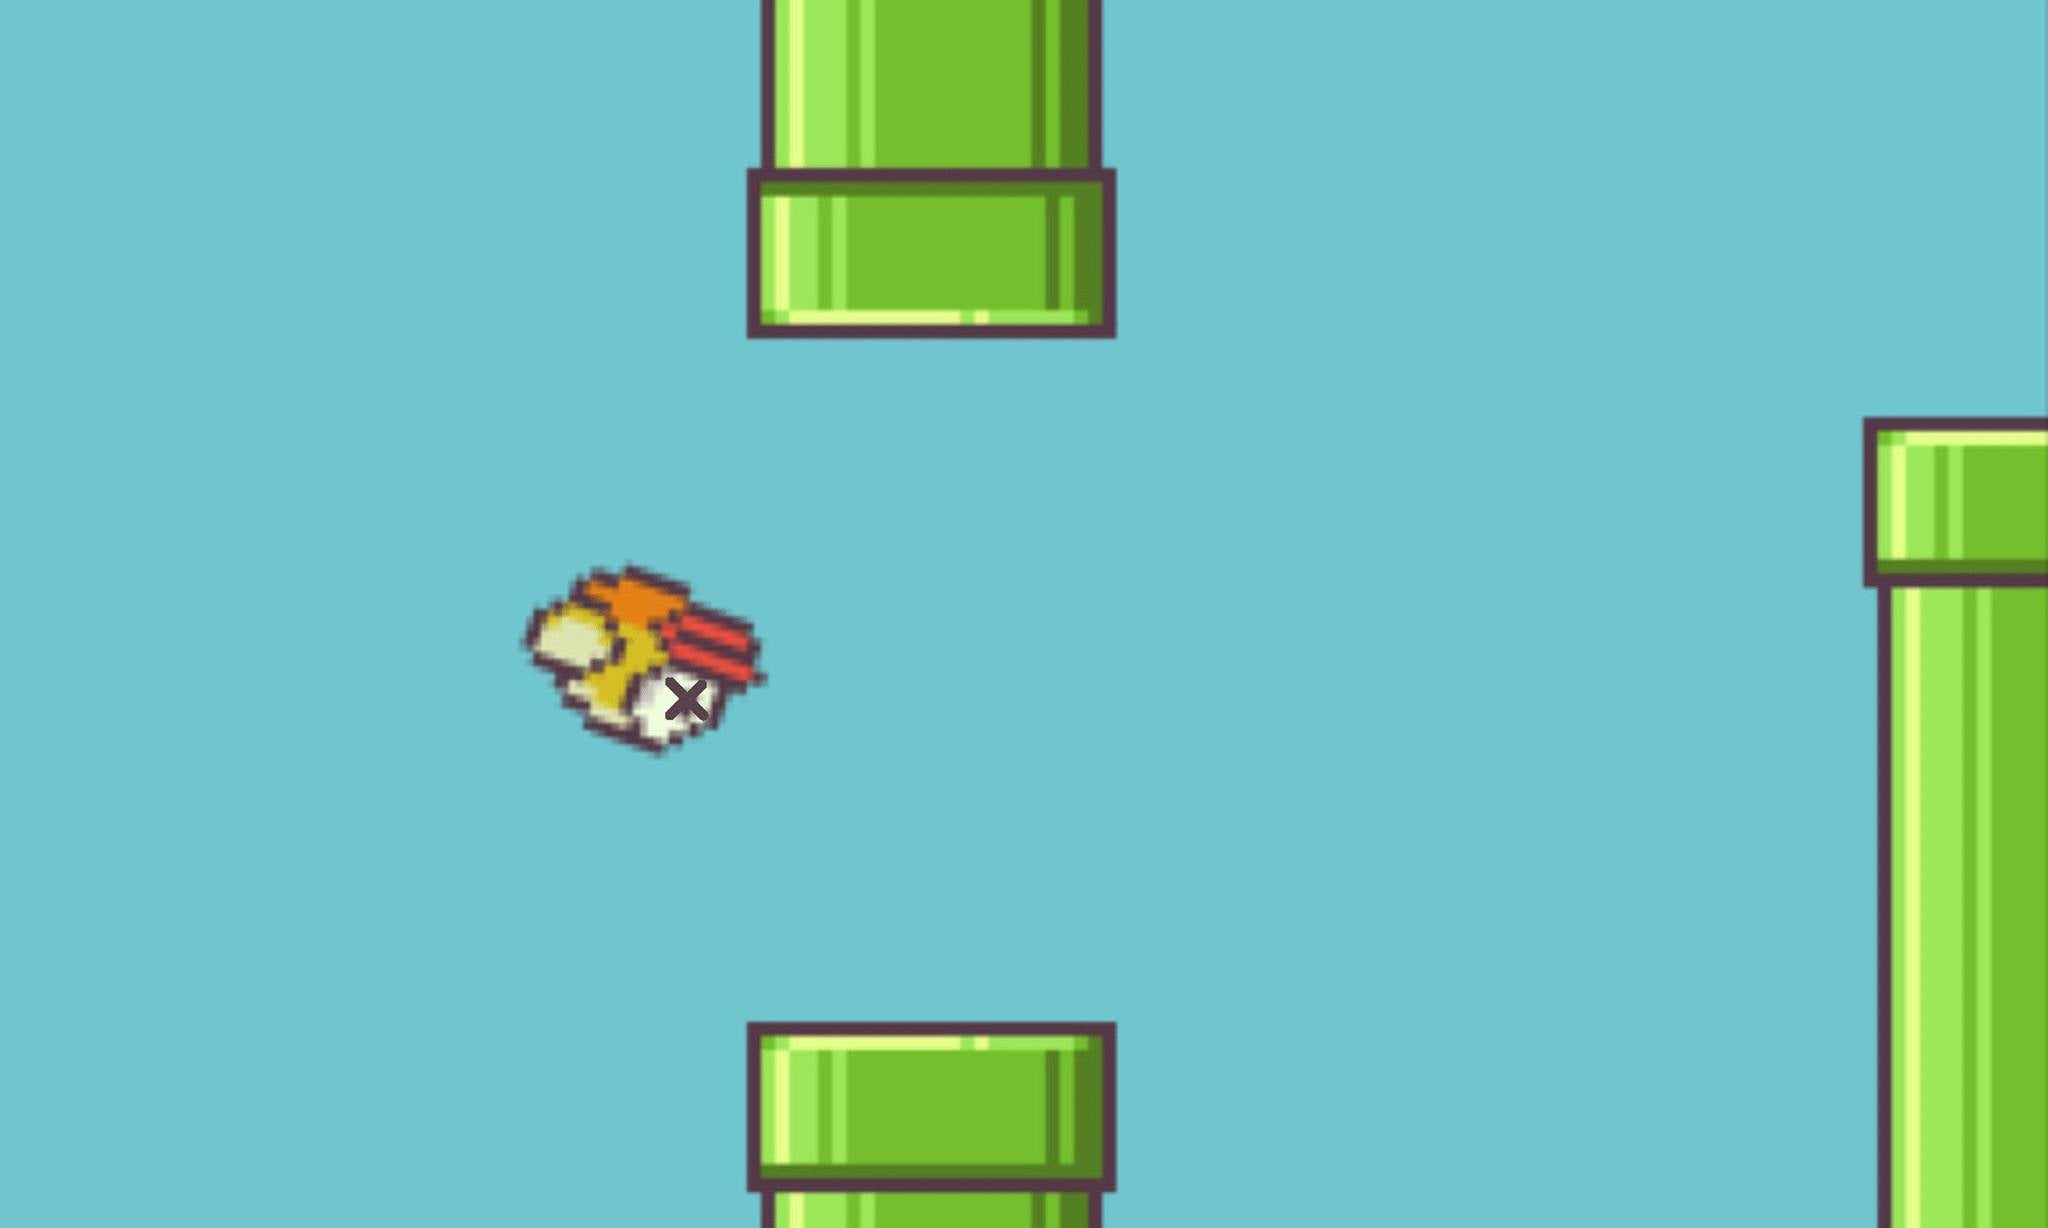 Flappy Bird flaps no more in the app stores